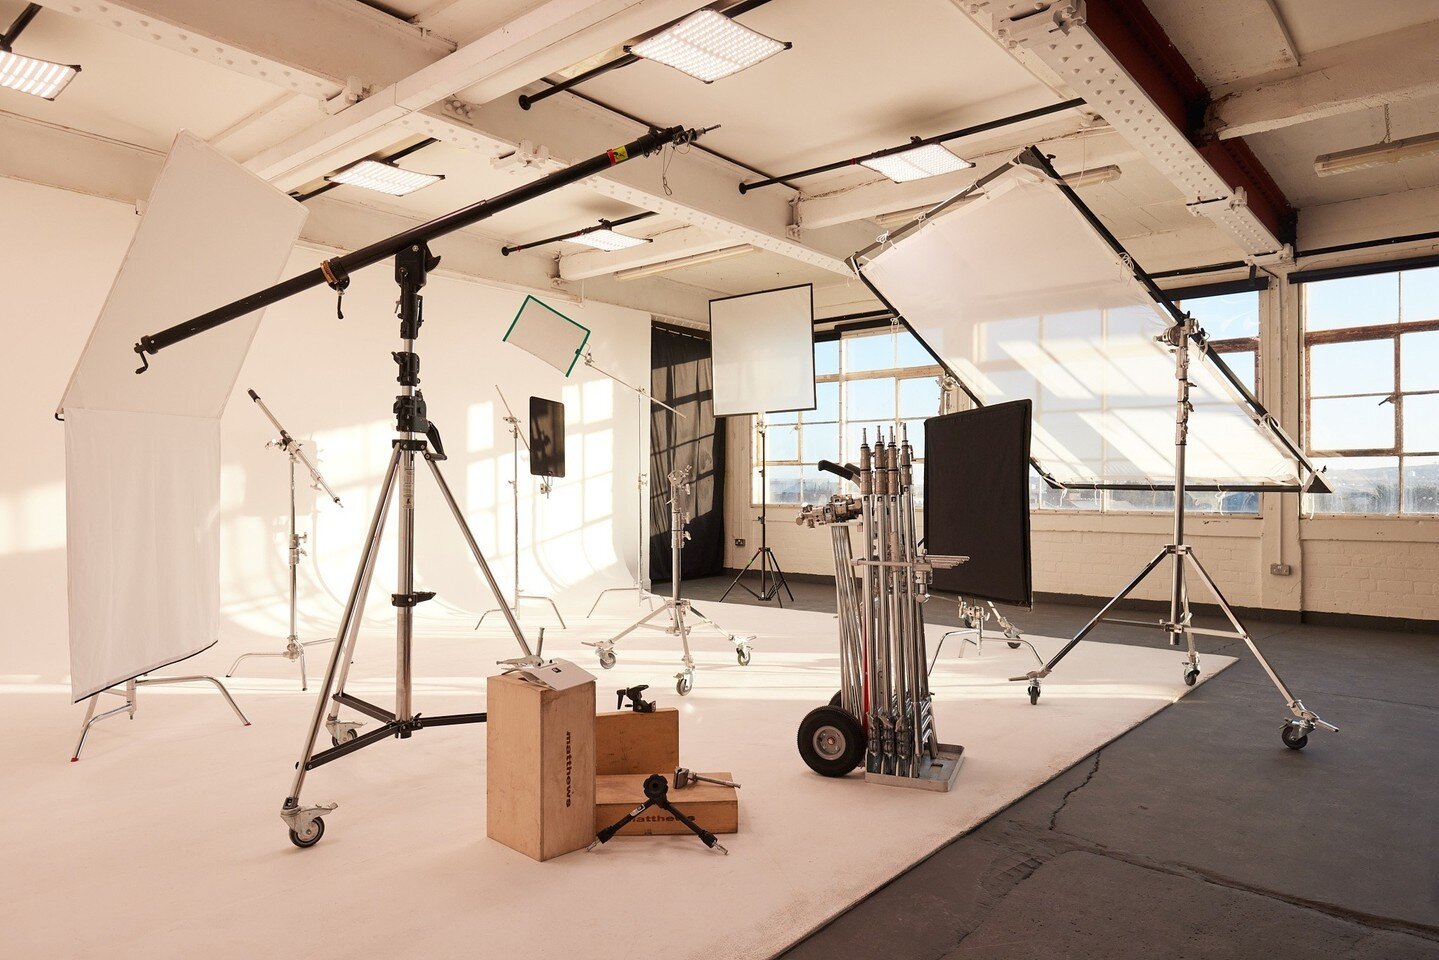 Get all your grip, textiles and stands you need from us here at @broadscopestudios ! We have the equipment appropriate for your productions needs and wants, whether it be on location and requires a more heavy duty set-up/mobility or in our studio spa